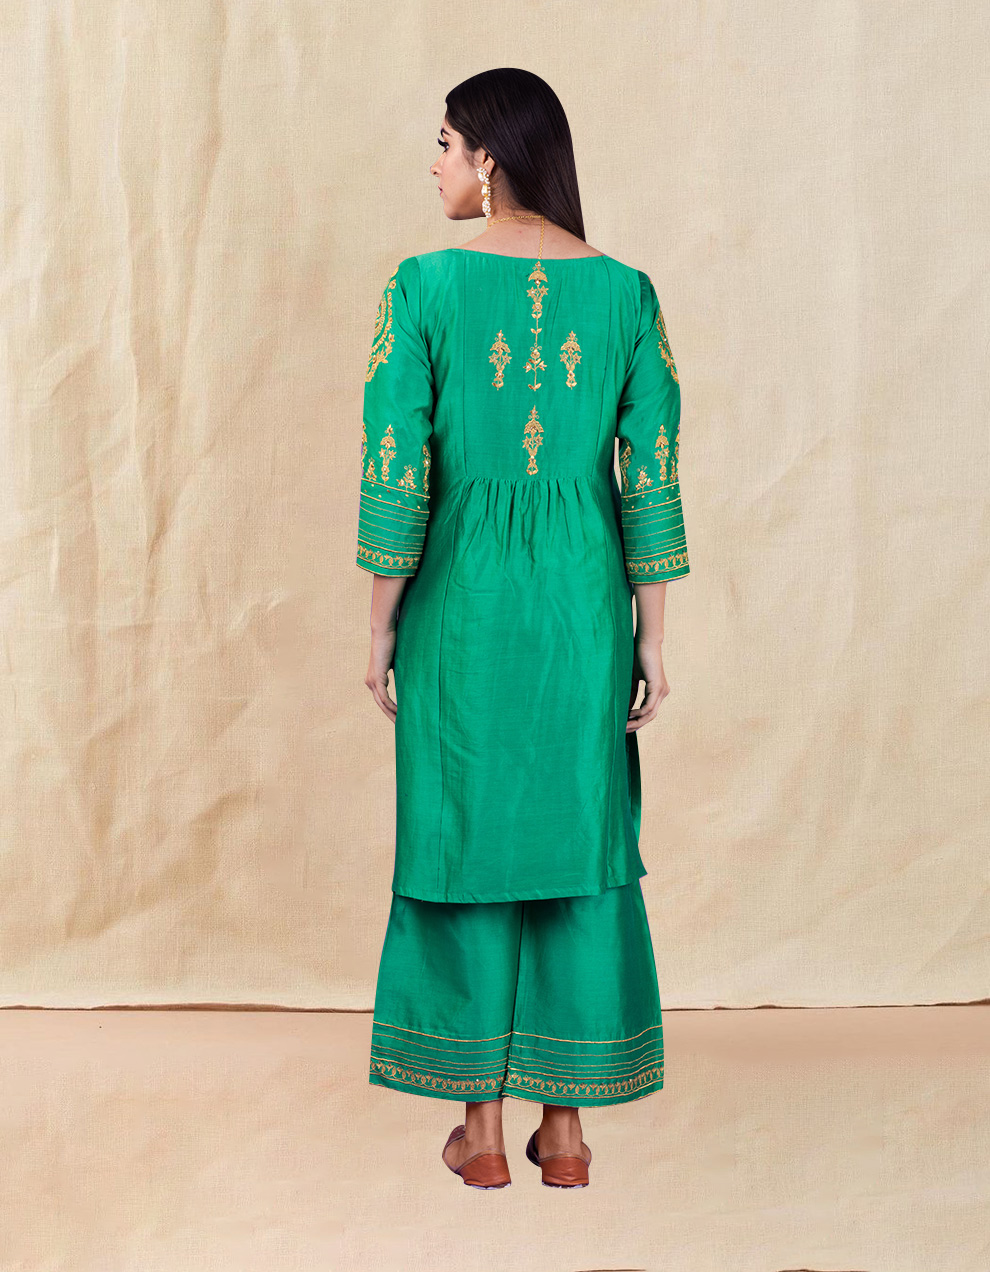 Shop-now-best-quality-brand-new-offers-on-Green-hand-embroidered-chanderi-silk-kurta-designers-in-India,-3